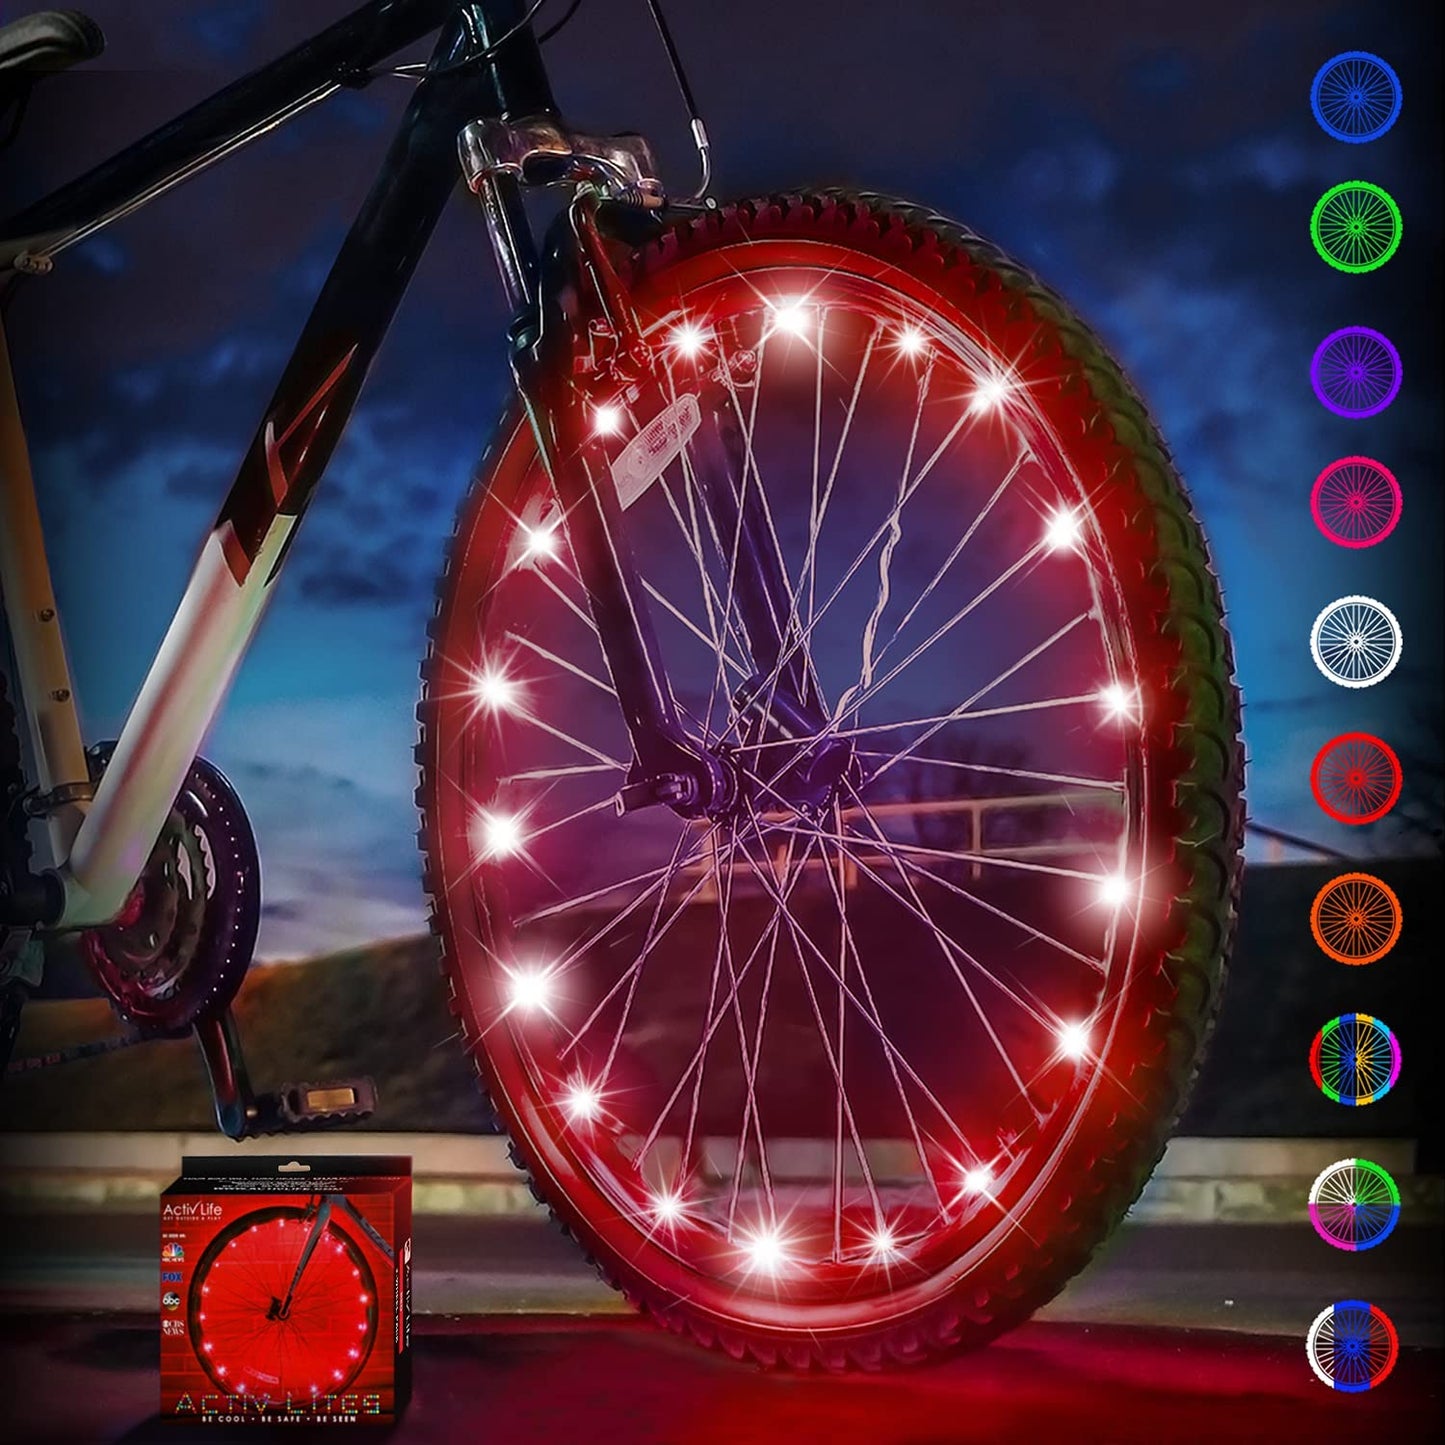 Activ Life LED Bike Wheel Lights with Batteries Included! Get 100% Brighter and Visible from All Angles for Ultimate Safety & Style (1 Tire Pack)